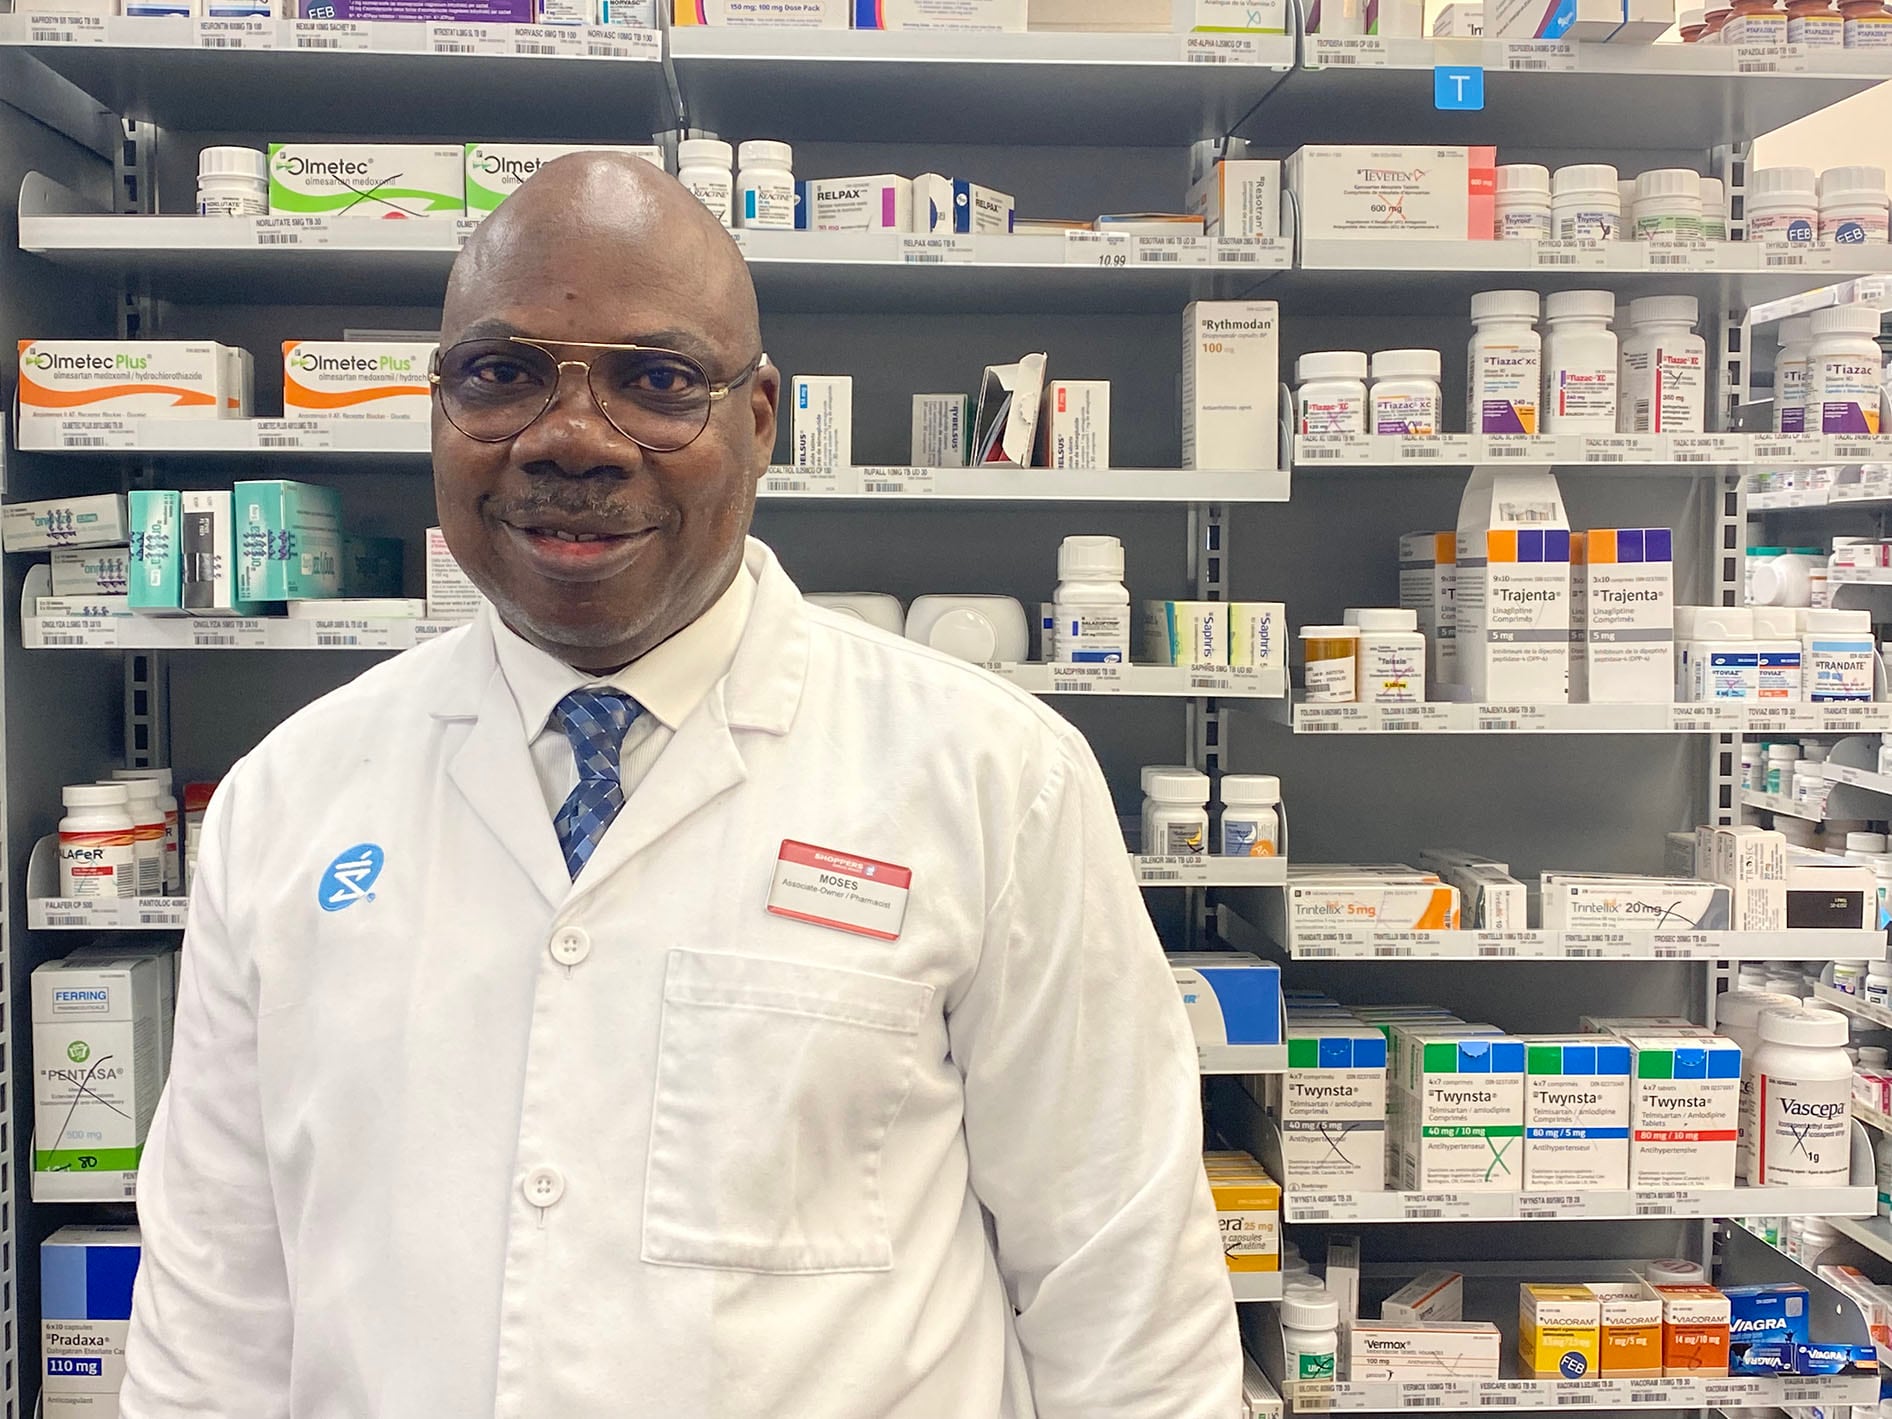 Moses stands wearing his lab coat behind the pharmacy counter.   